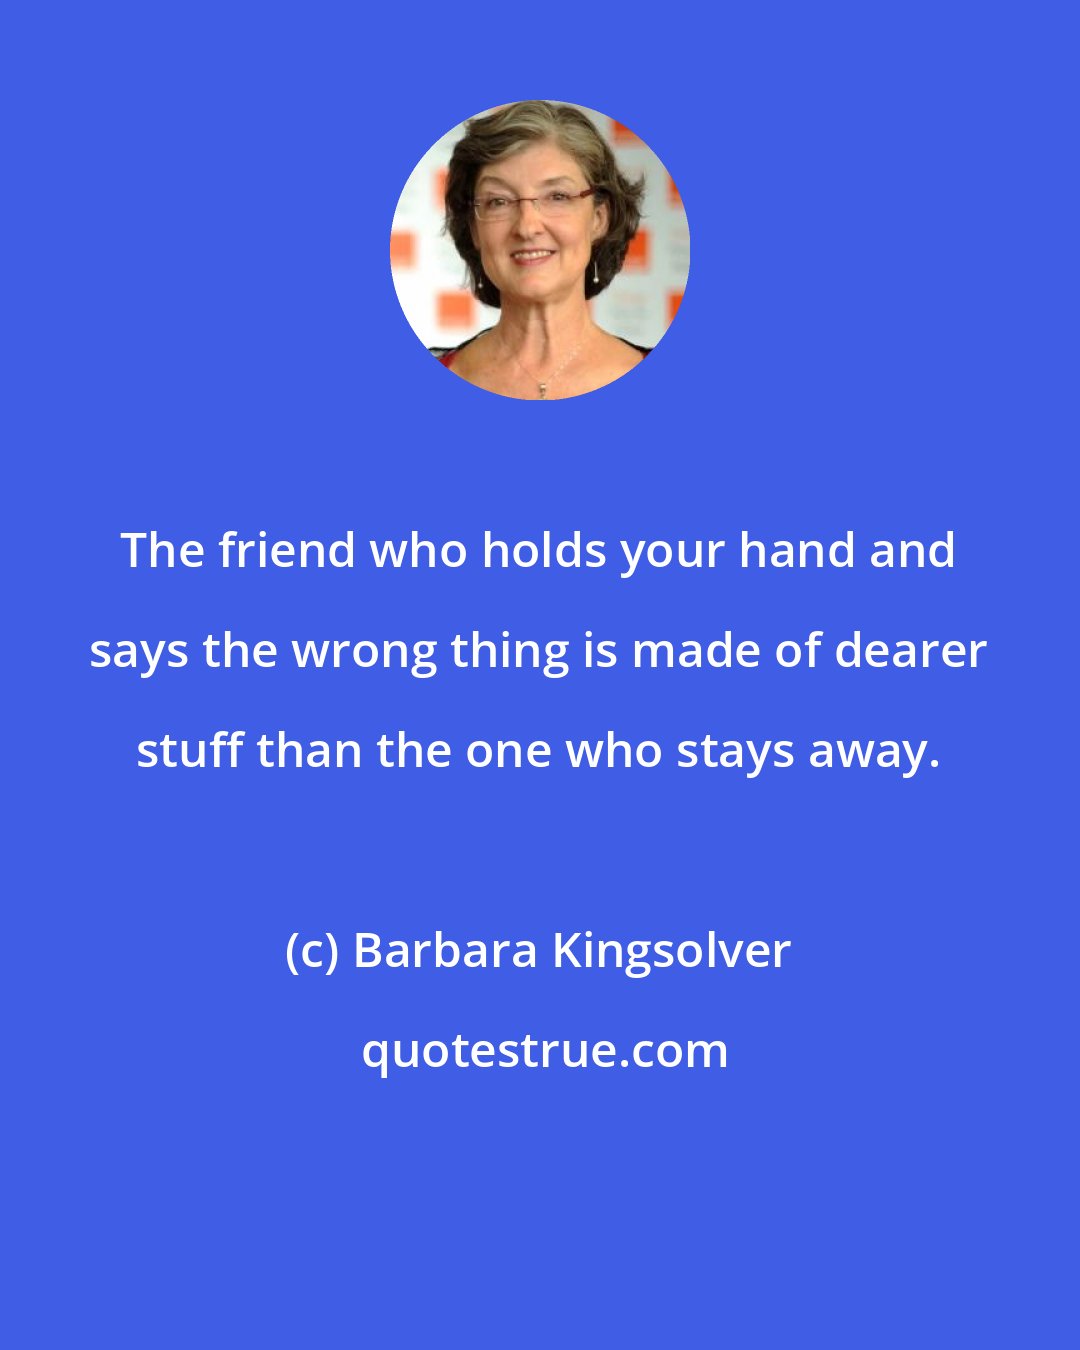 Barbara Kingsolver: The friend who holds your hand and says the wrong thing is made of dearer stuff than the one who stays away.